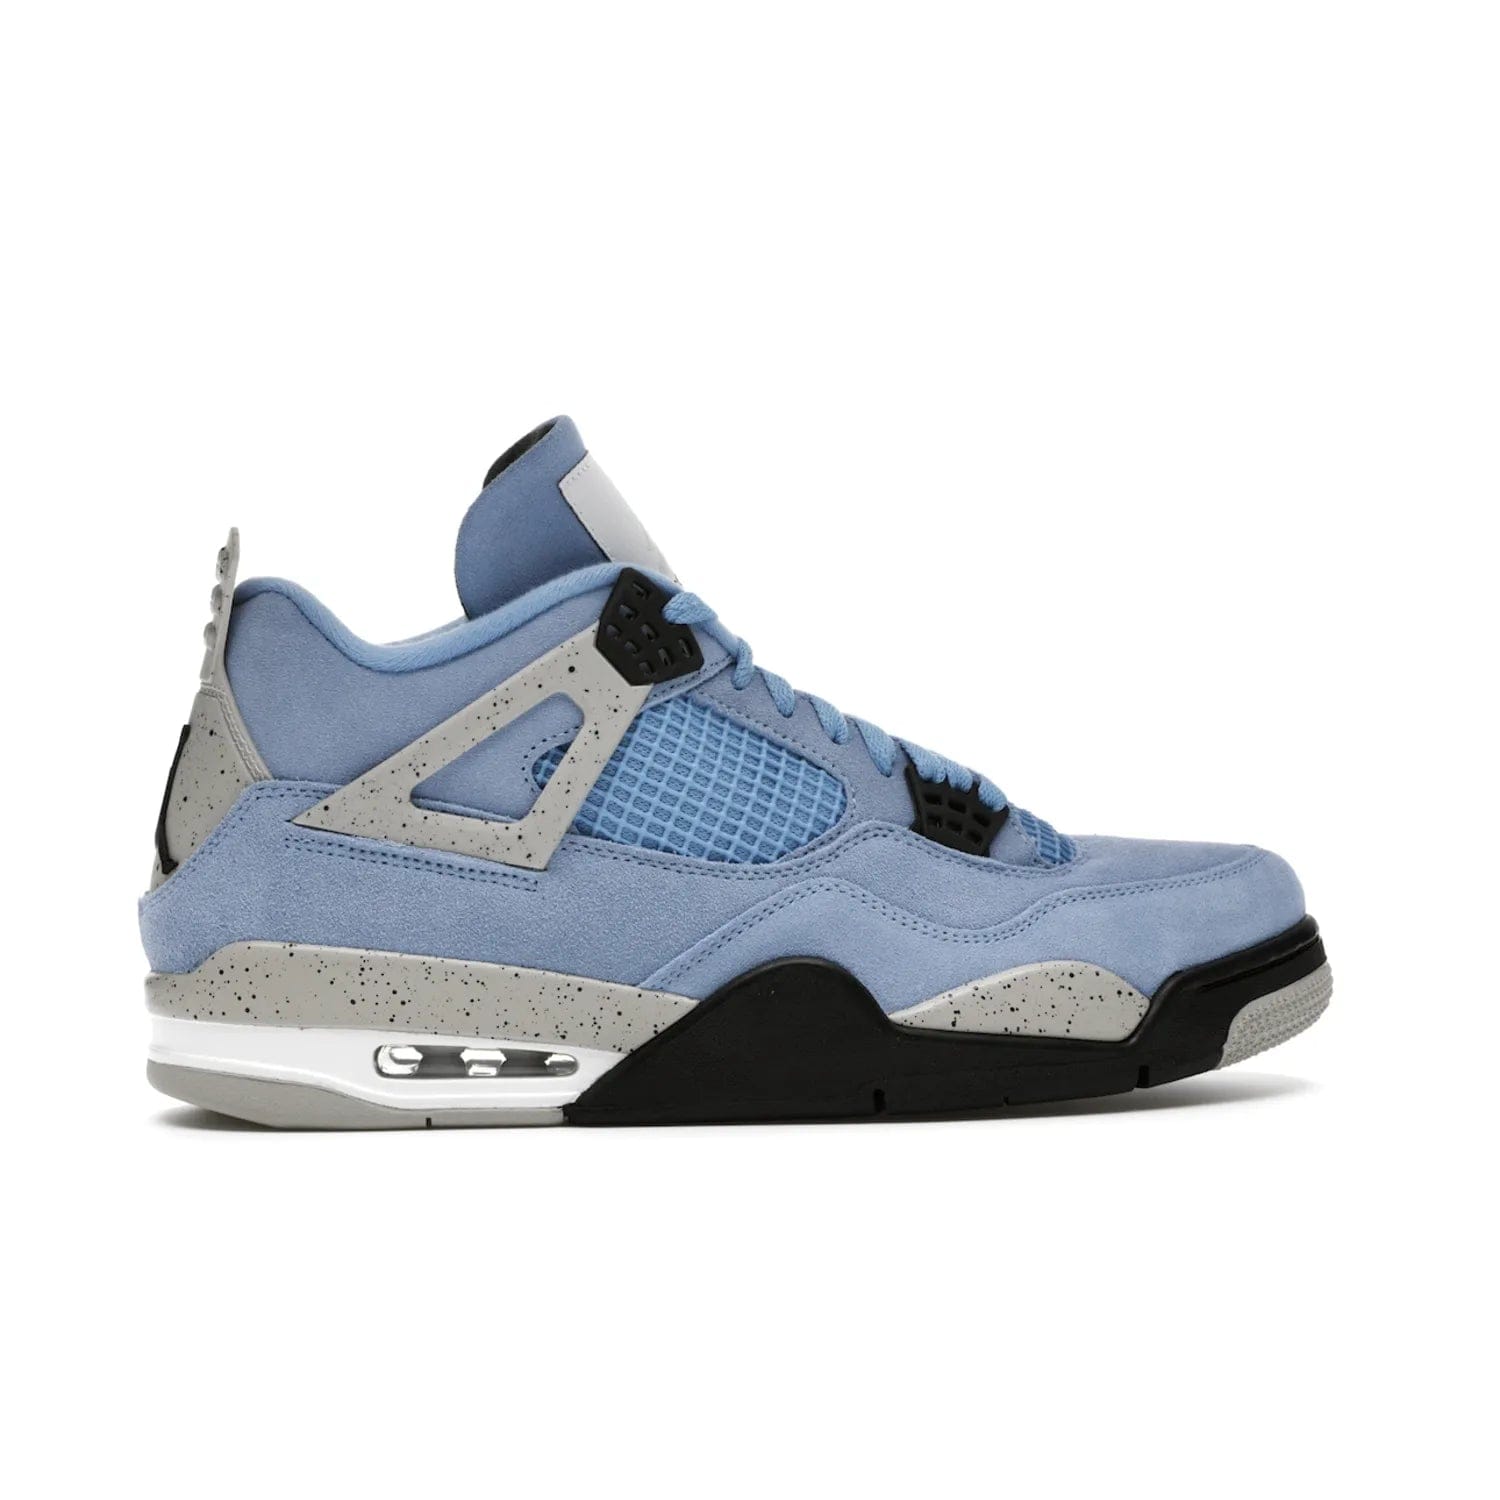 Jordan 4 Retro University Blue - Image 36 - Only at www.BallersClubKickz.com - The Air Jordan 4 University Blue honors MJ's alma mater. Rich University Blue suede, panels of netting, and Cement Grey speckled eyelets give this design an edgy look. Features a black, white and Tech Grey sole with a clear Air unit and two woven labels on the tongue. Jumpman logo & Team Jordan jock tag included. Released April 2021.